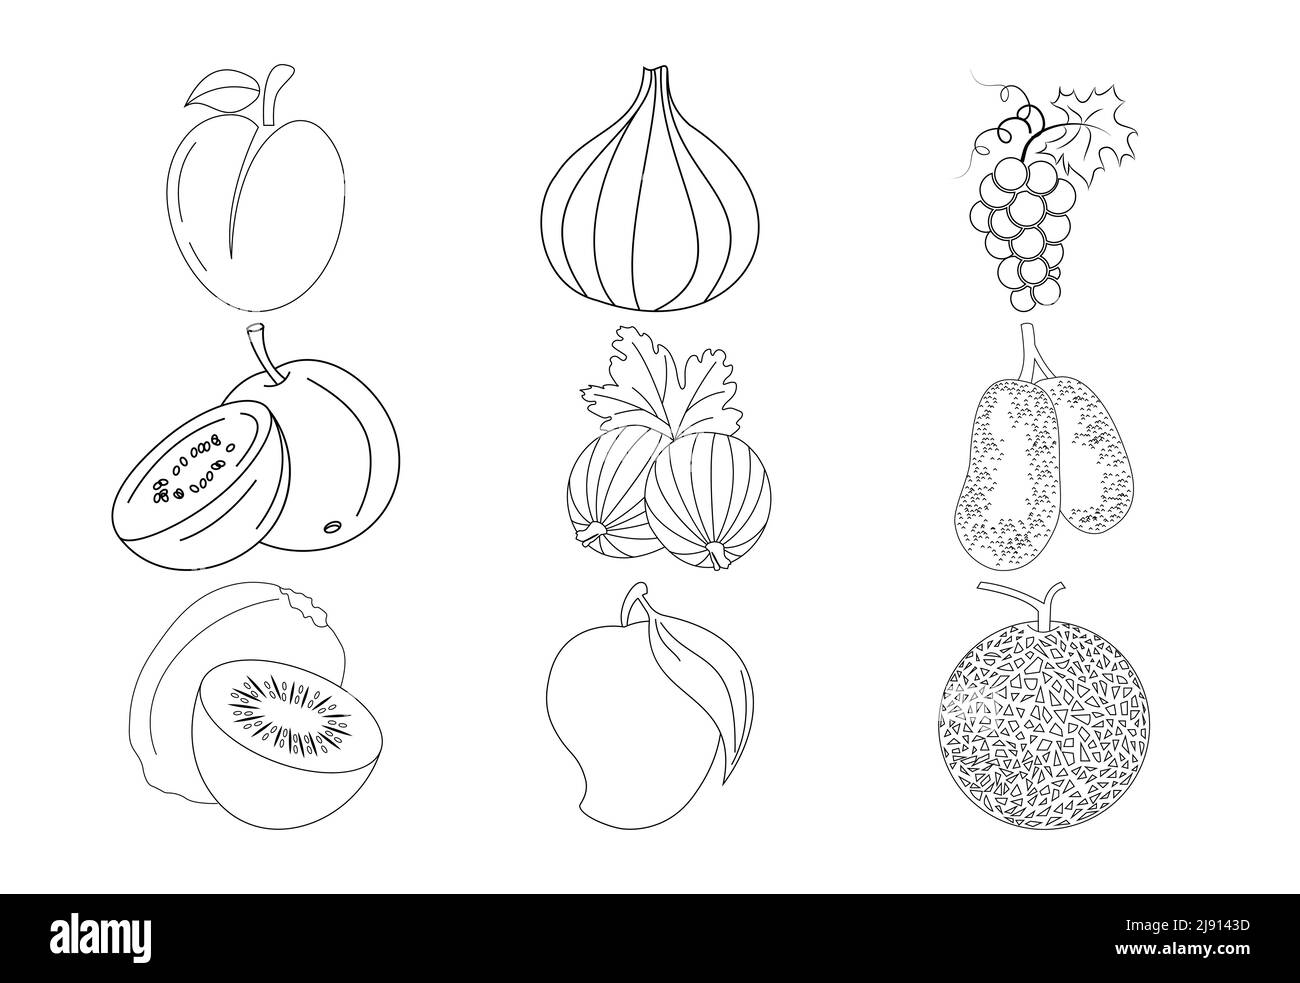 Fruits coloring pages vector illustration on white background ...